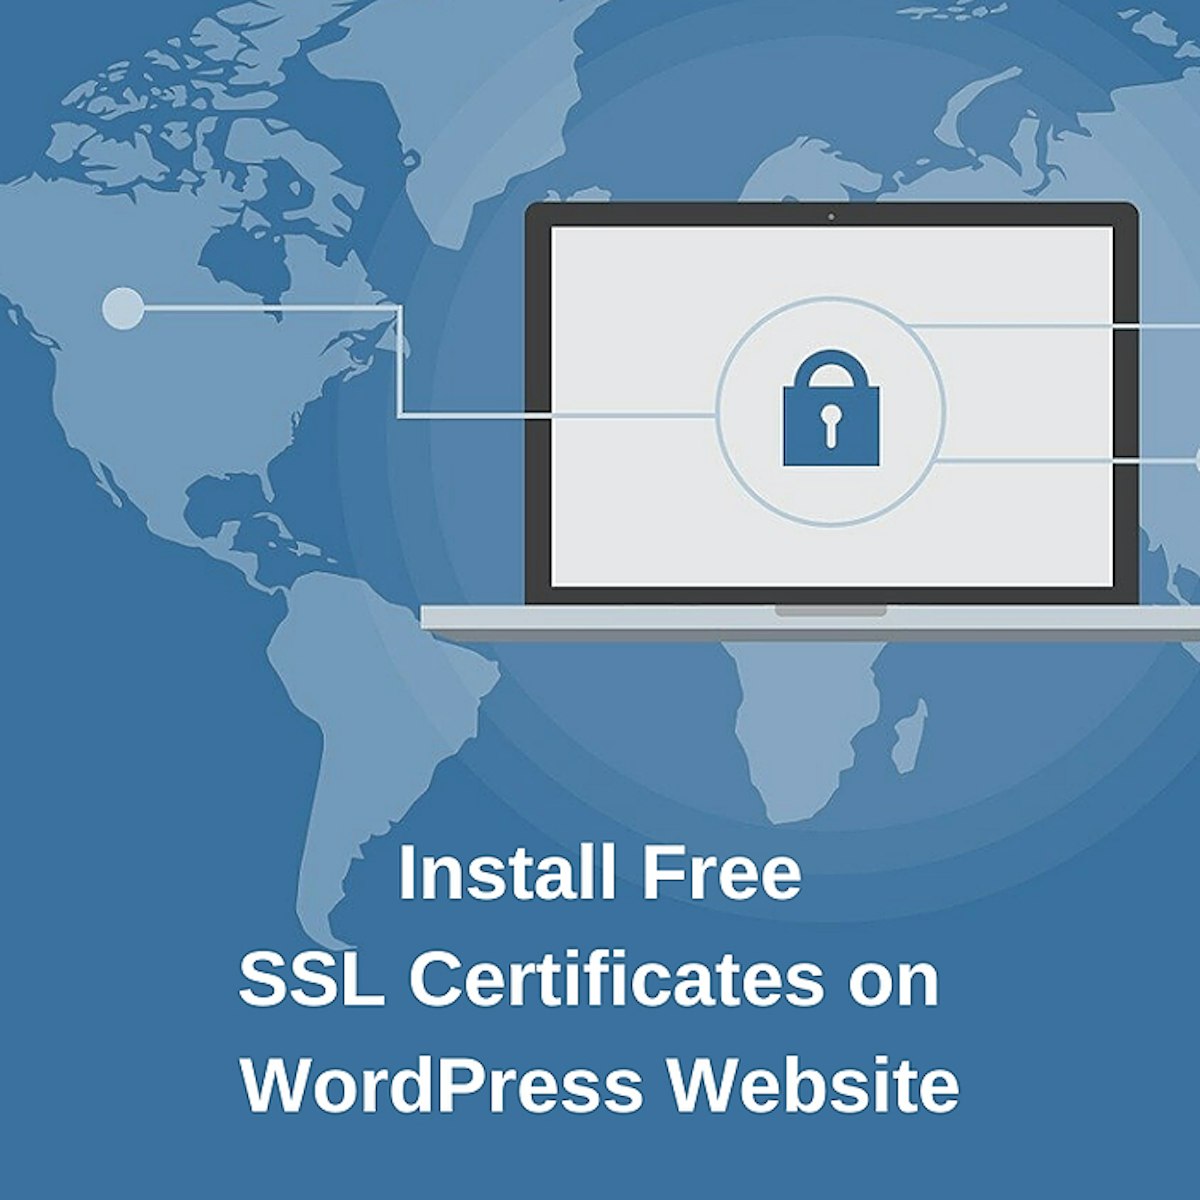 featured image - How to Install Free SSL Certificates on WordPress Websites